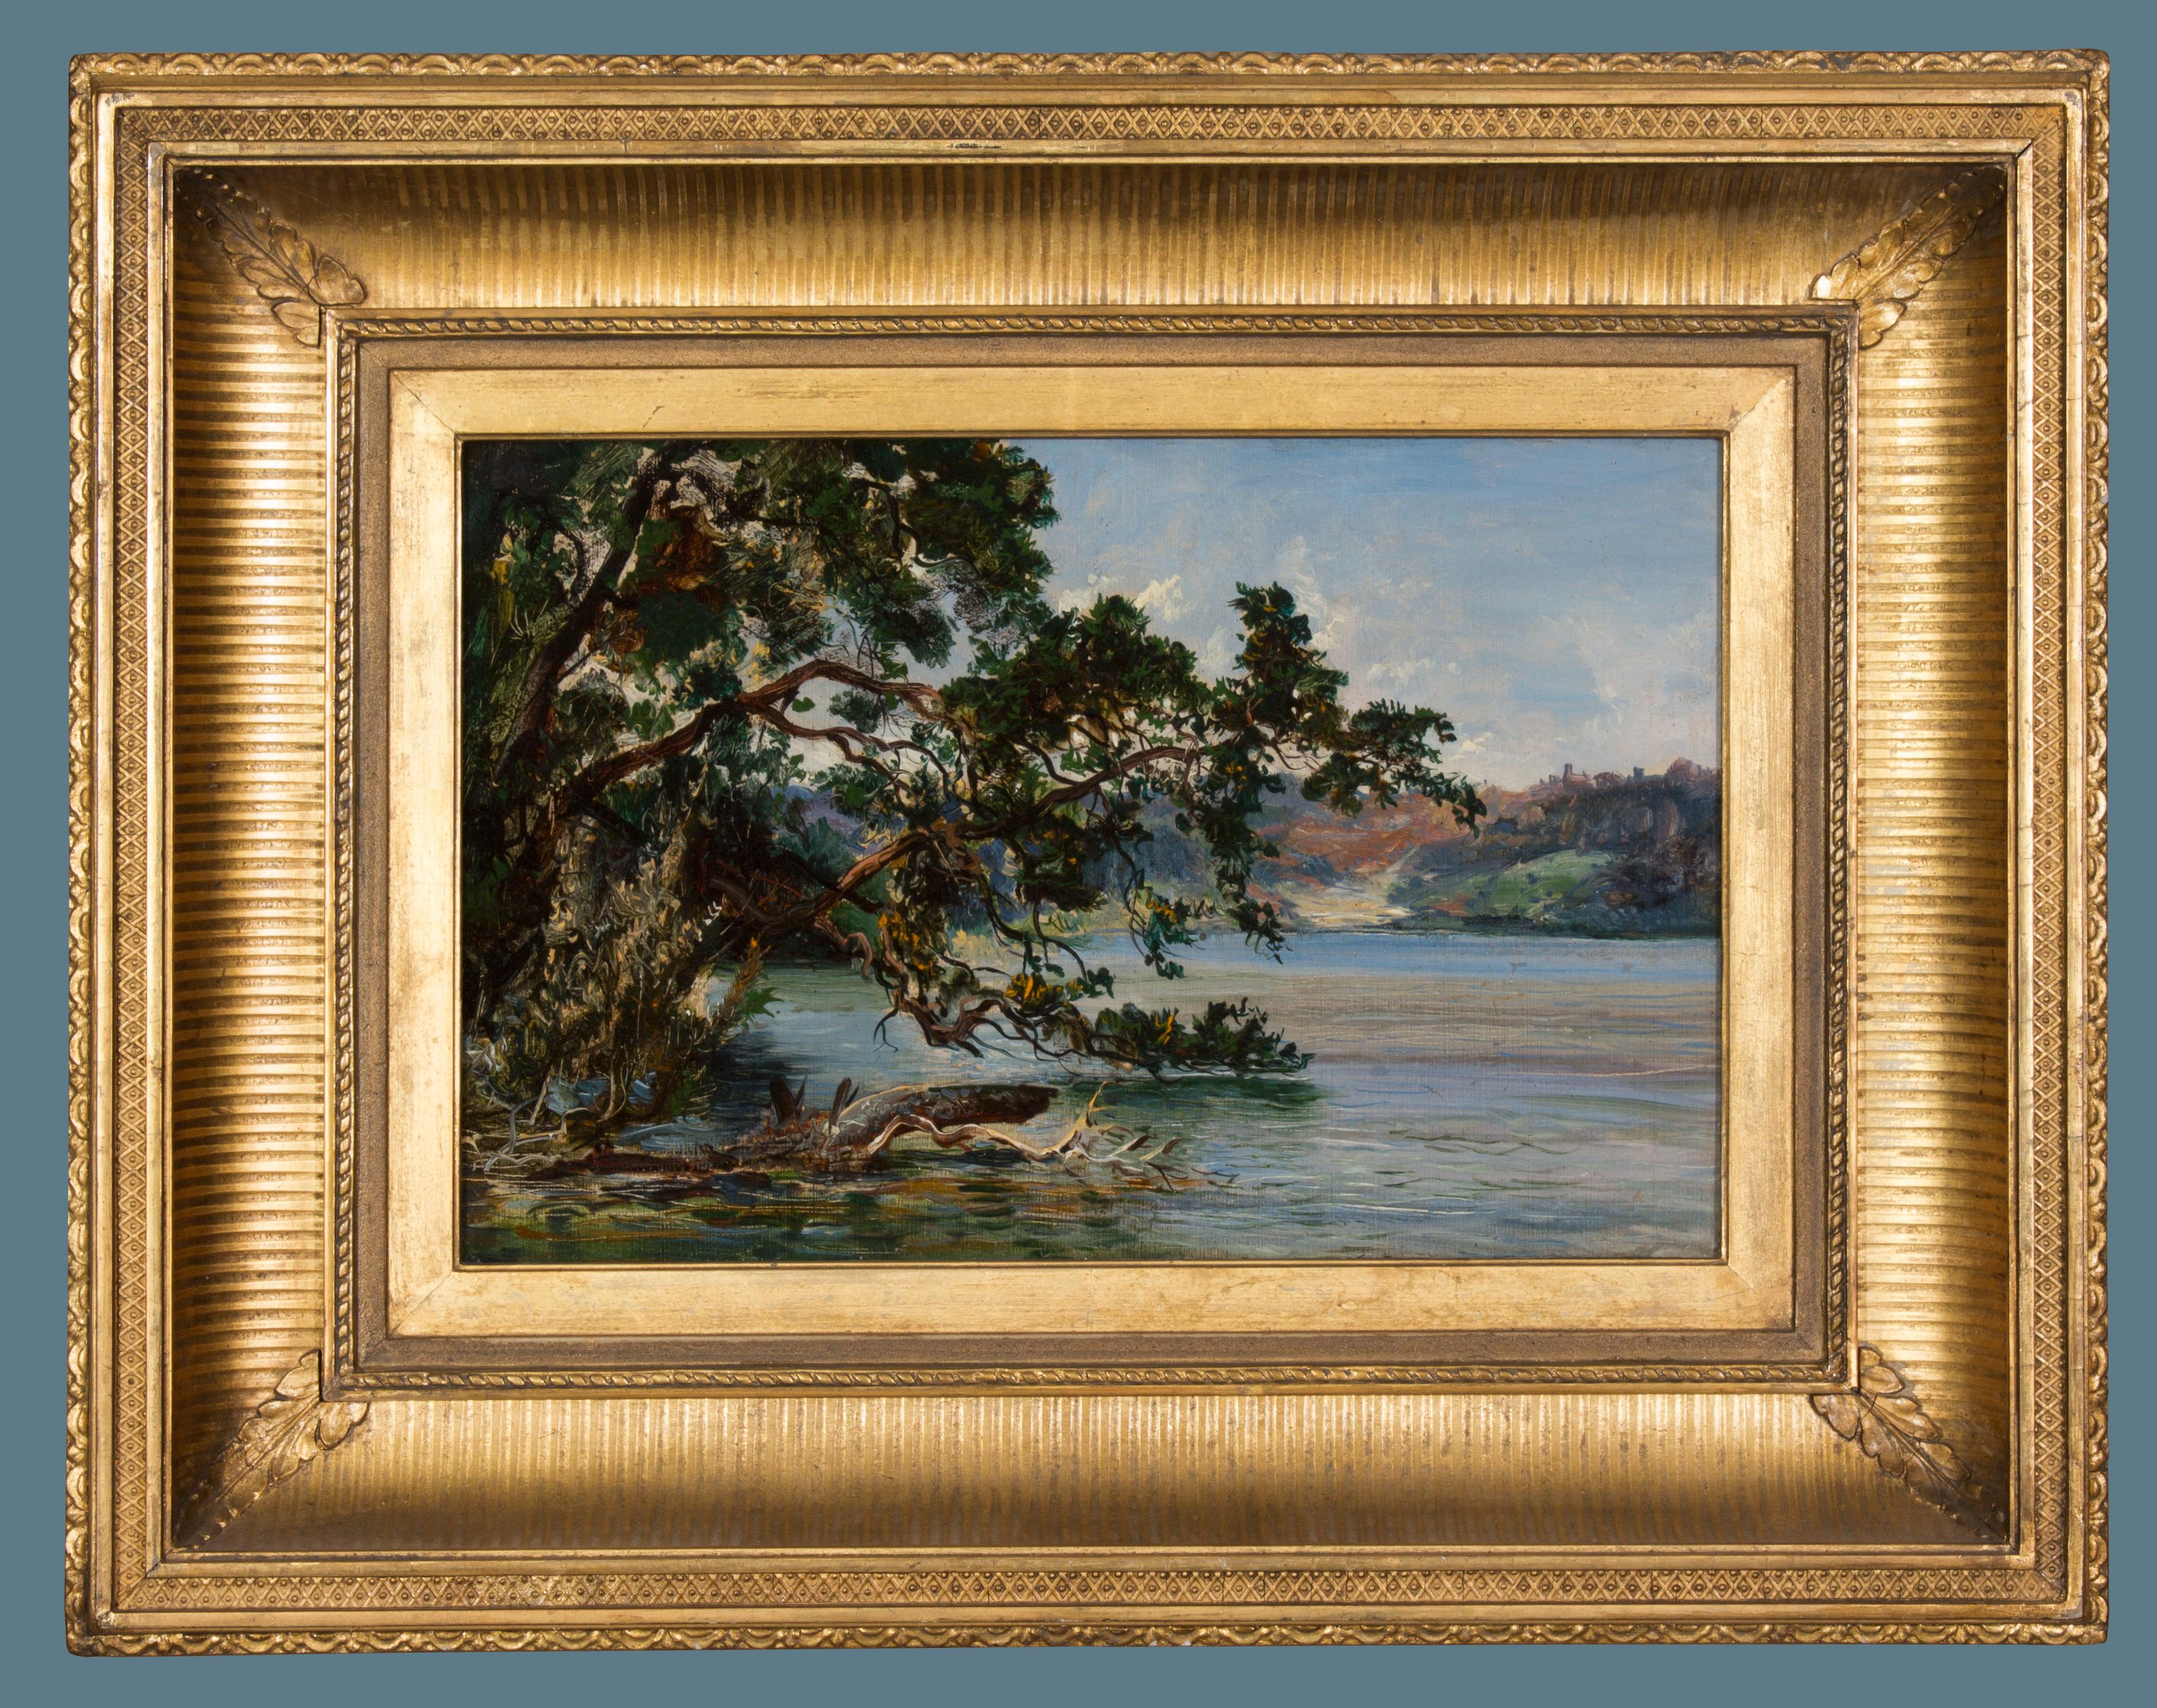 Unknown
(American, nineteenth century) 
River Bank
Oil on canvas, 9 x 13 1/2 inches
Framed: 13 1/2 x 18 inches (approx.)